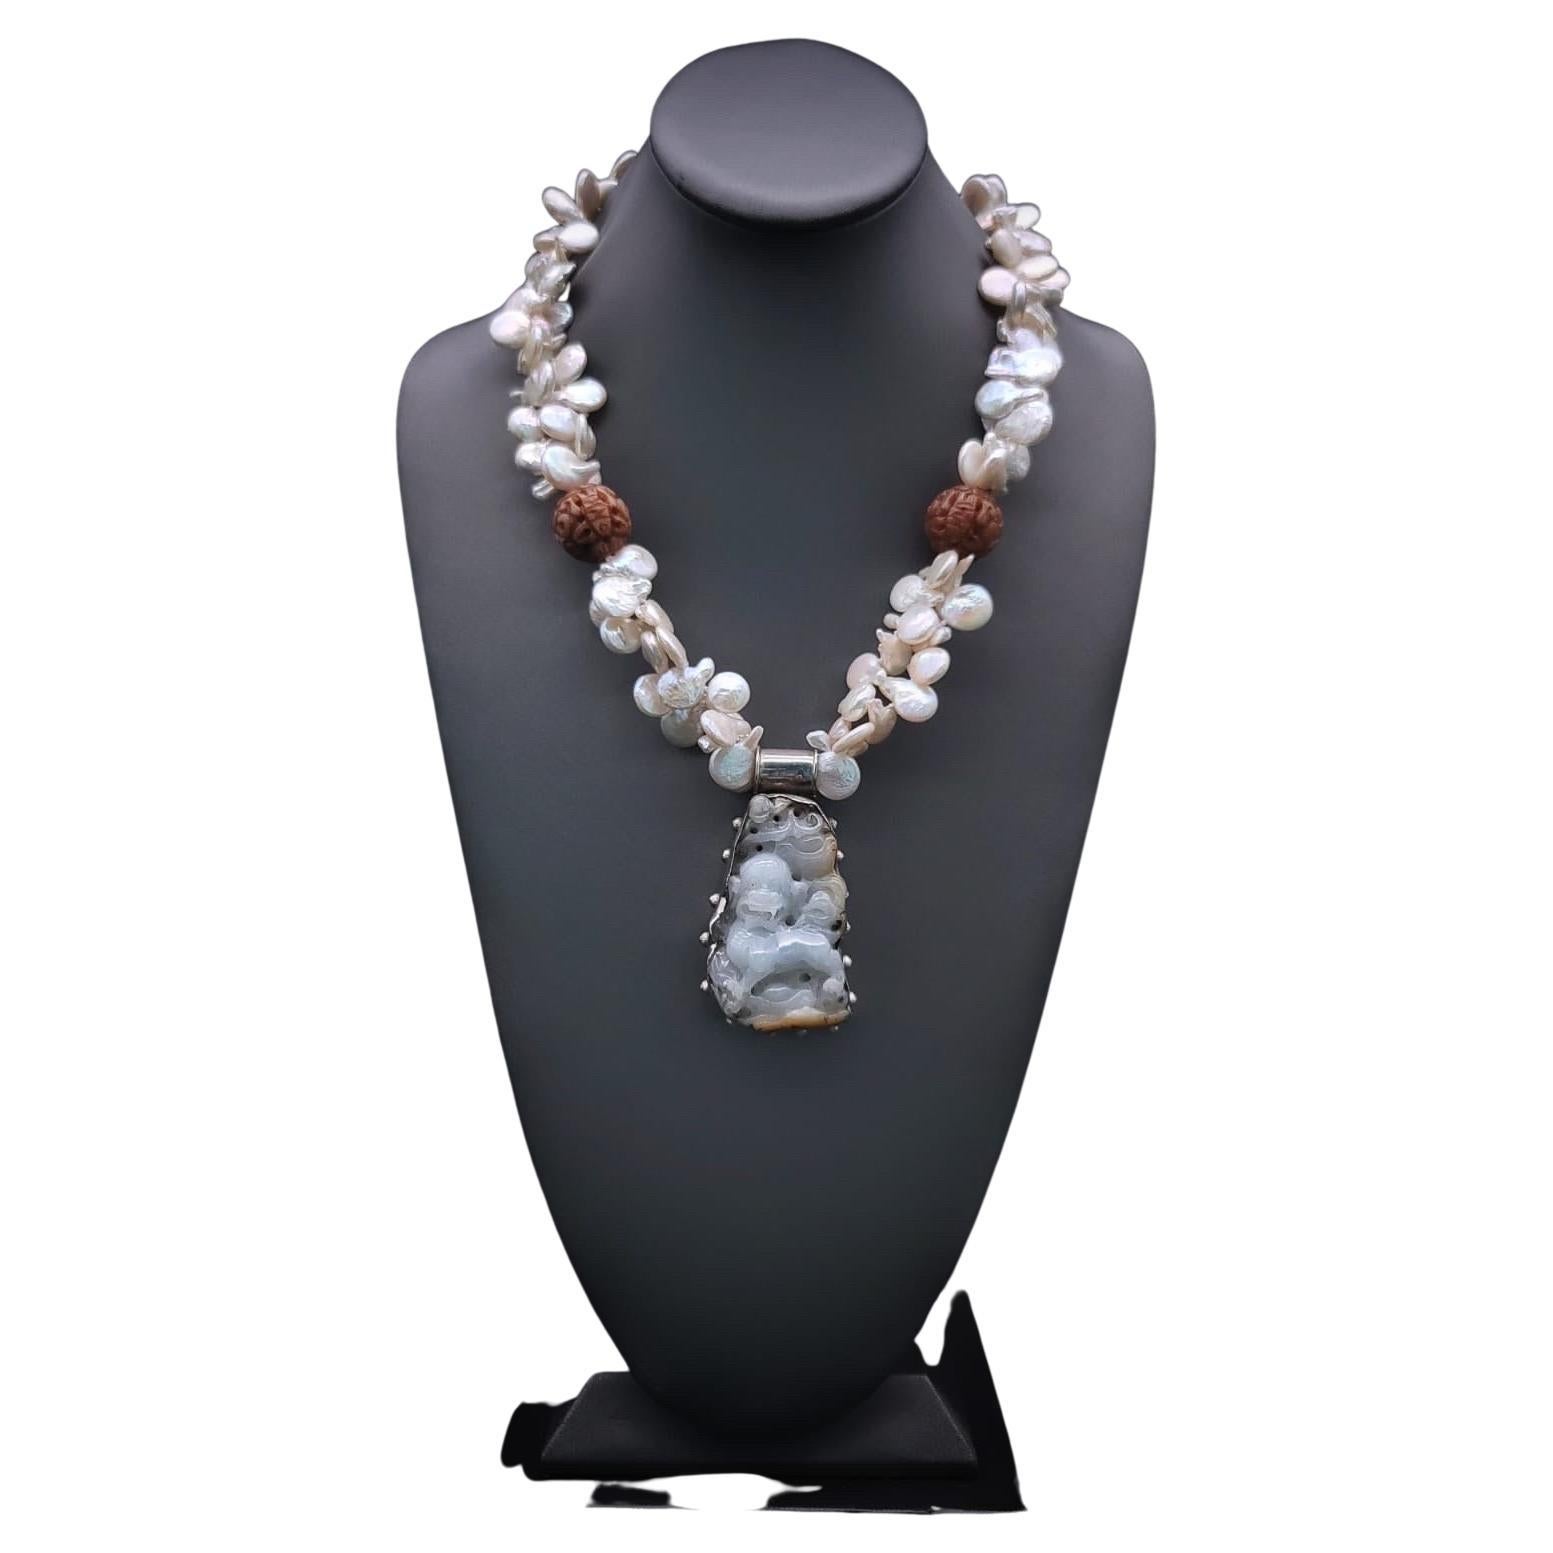 One-of-a-Kind

The foo dog pendant hangs from a Baroque Pearl double strand with a pair of carved tobacco balls and coin pearl. The familiar imperial  Foo dog Chinese architectural ornamental lions are usually placed at the entrance of a building to